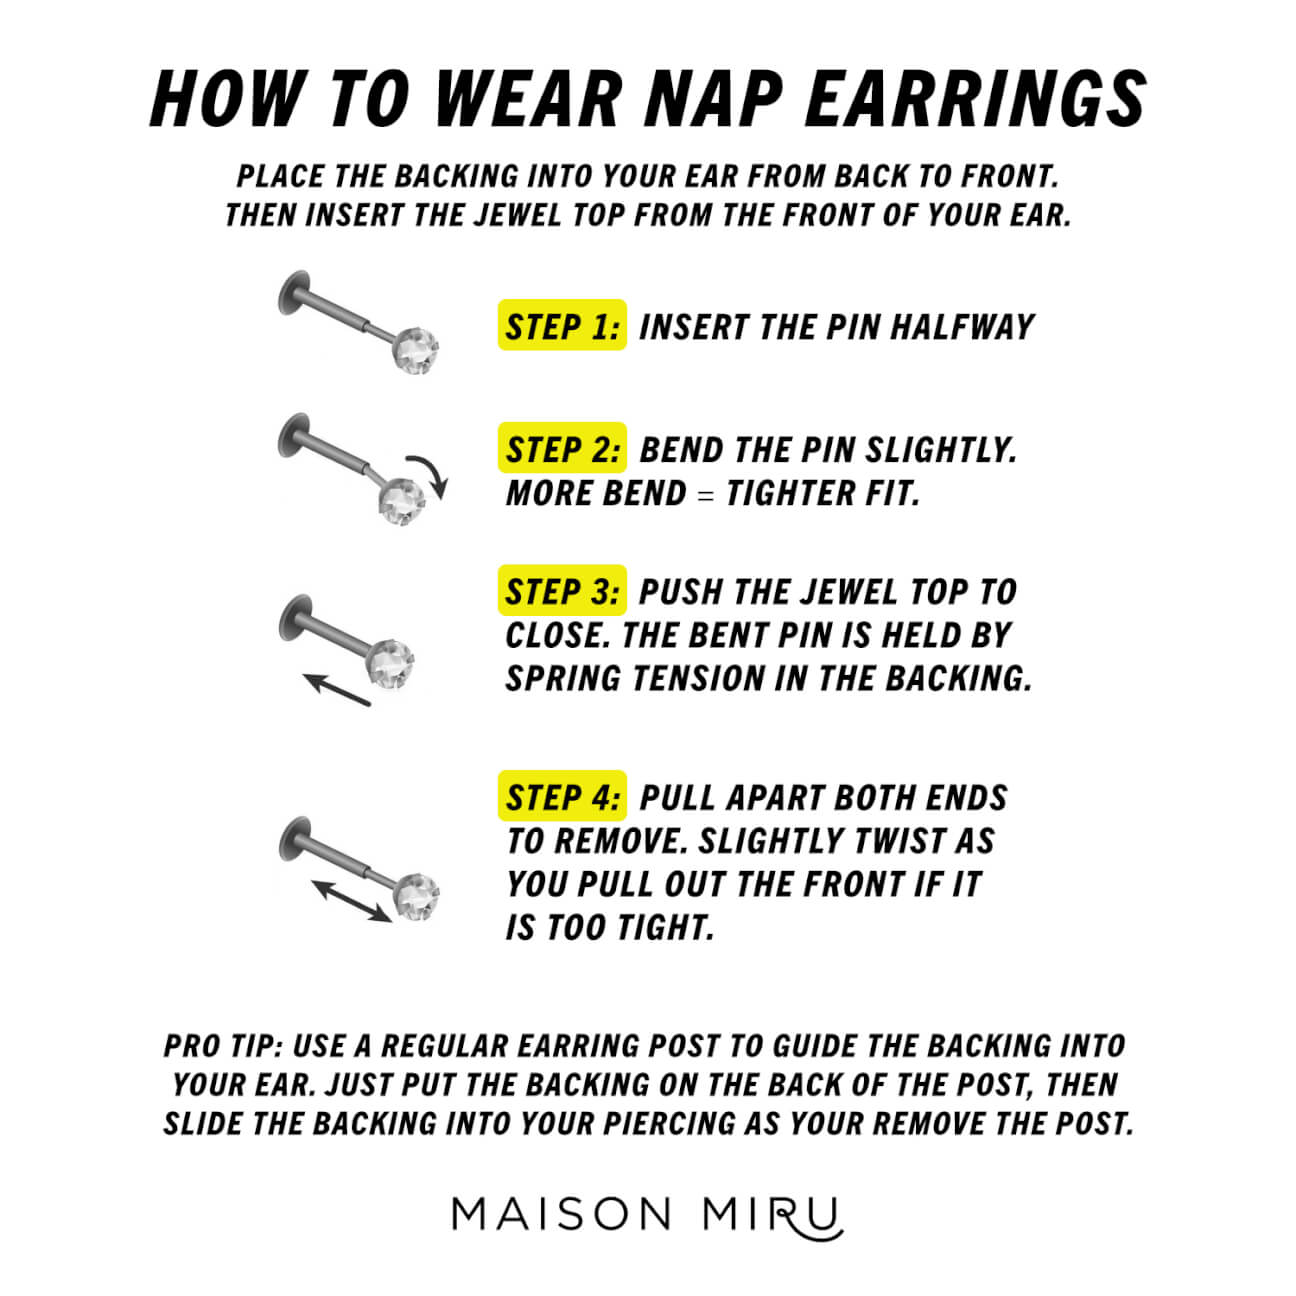 How to Wear the Classic Moon Nap Earrings